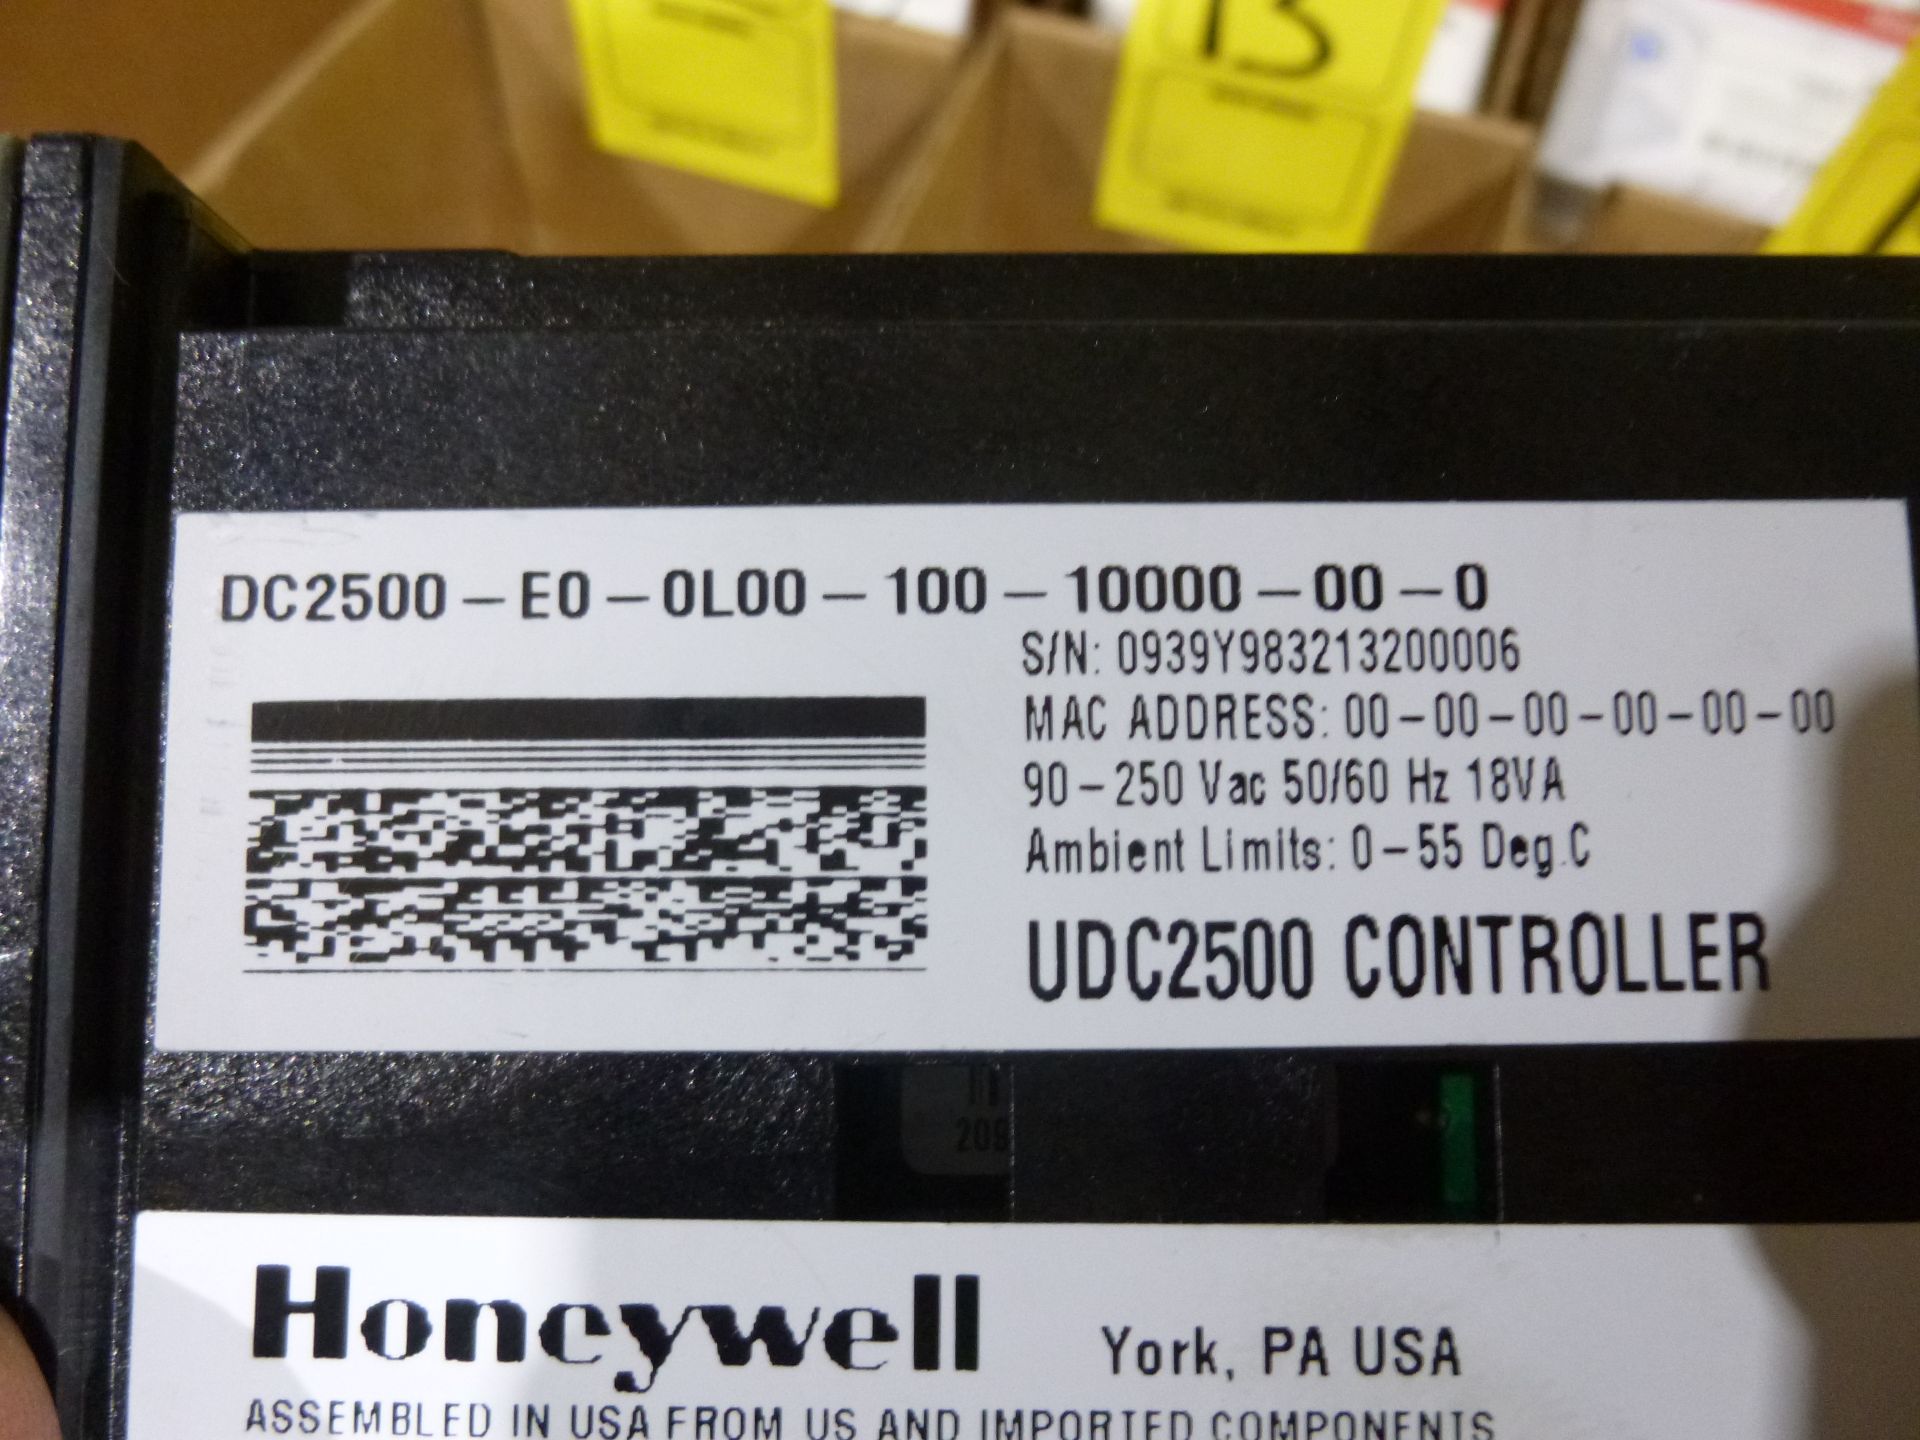 Honeywell controller UDC2500 part number DC2500-E0-0L00-100-10000-00-0 new, as always with Brolyn - Image 3 of 3